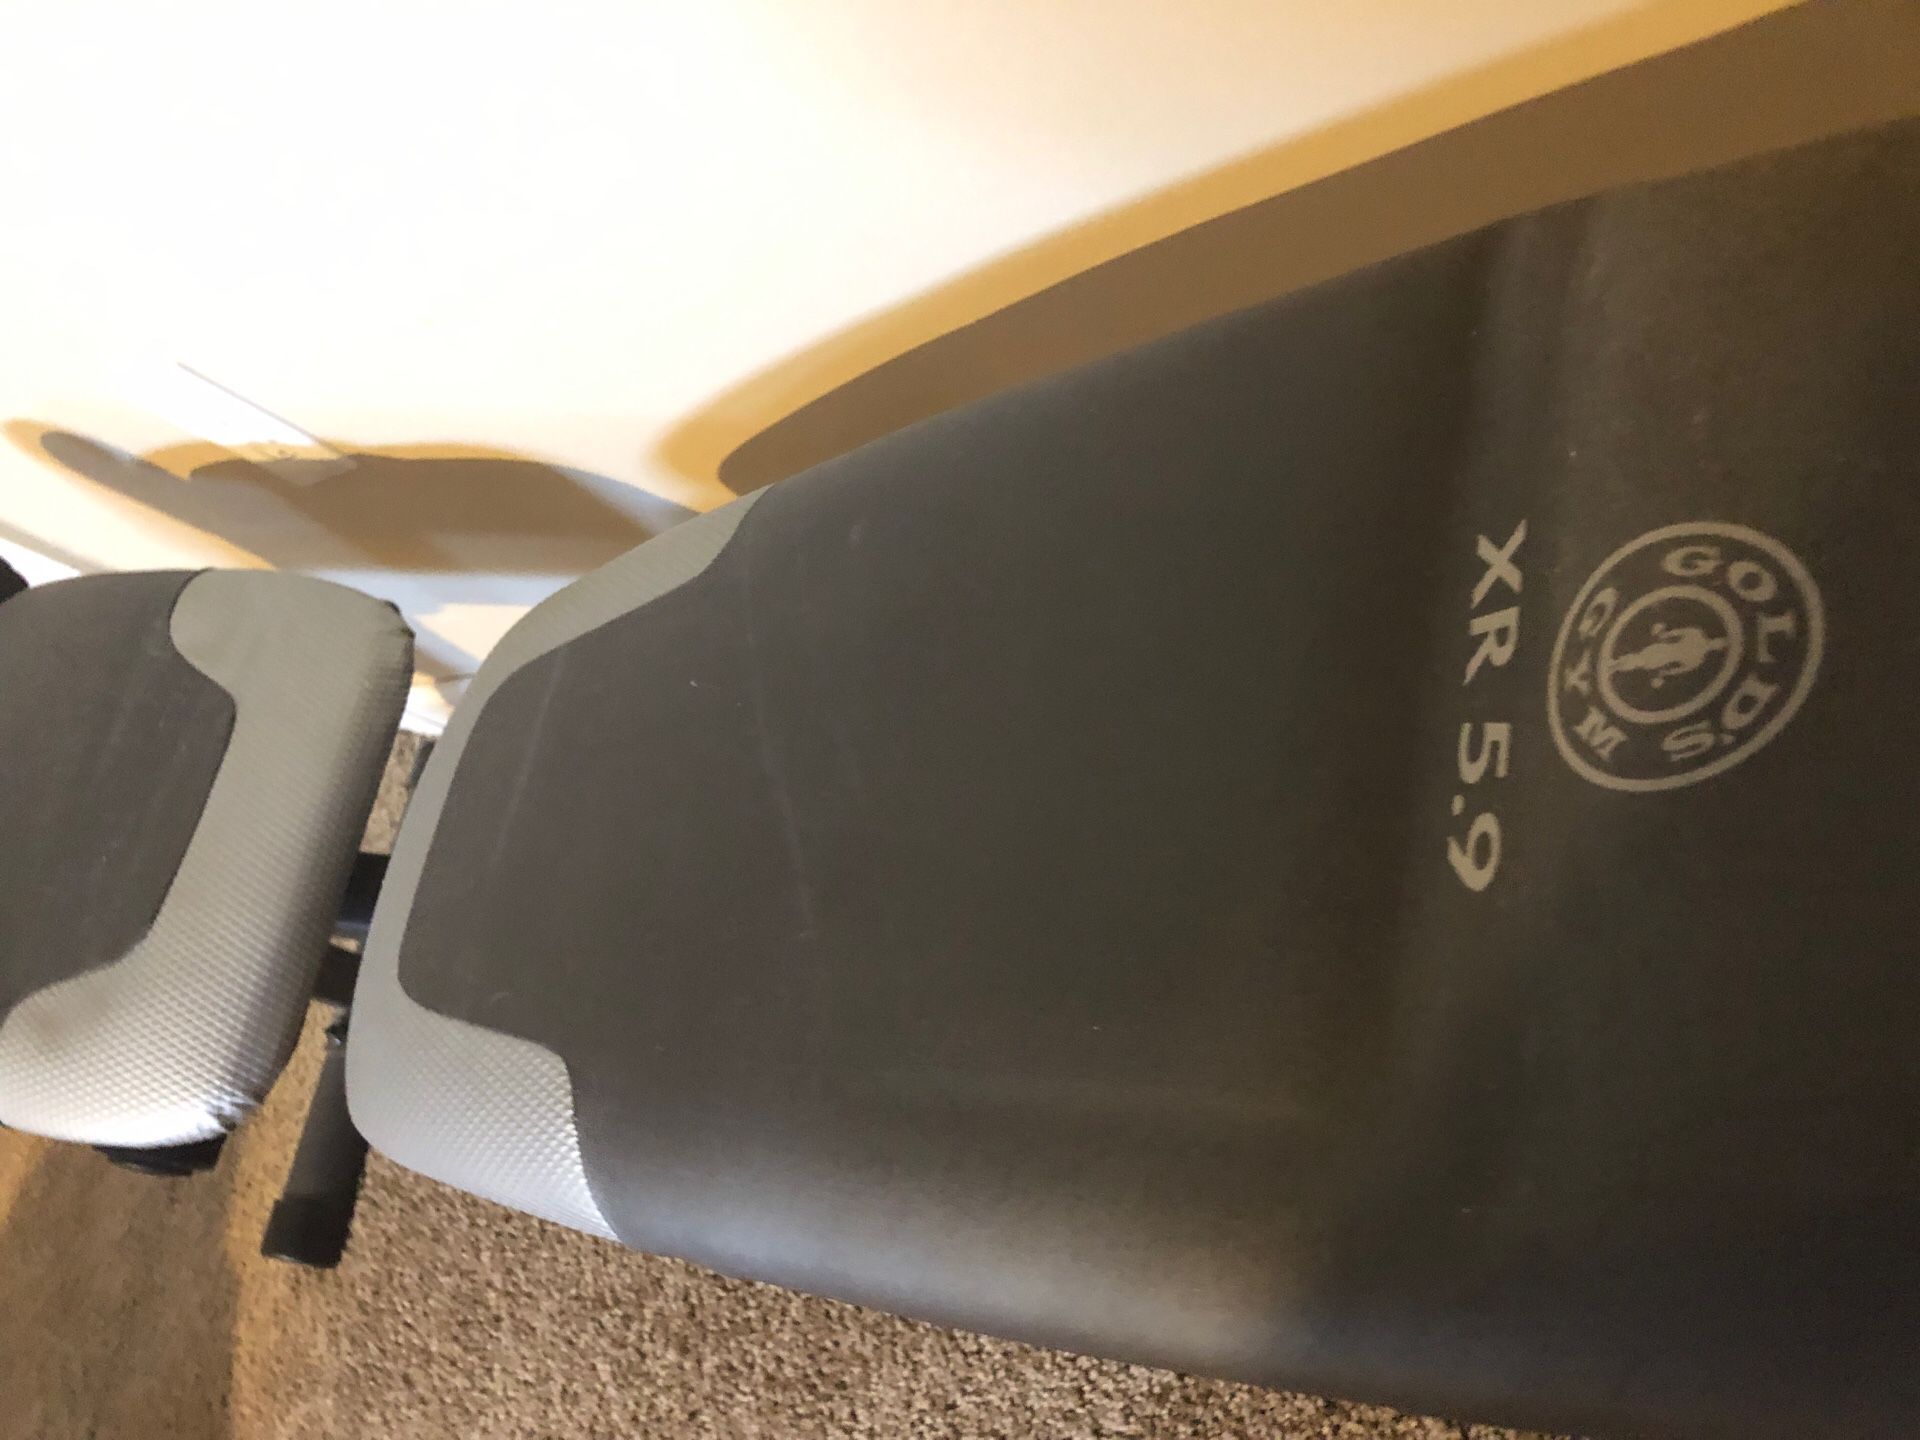 Golds Gym Weight Bench